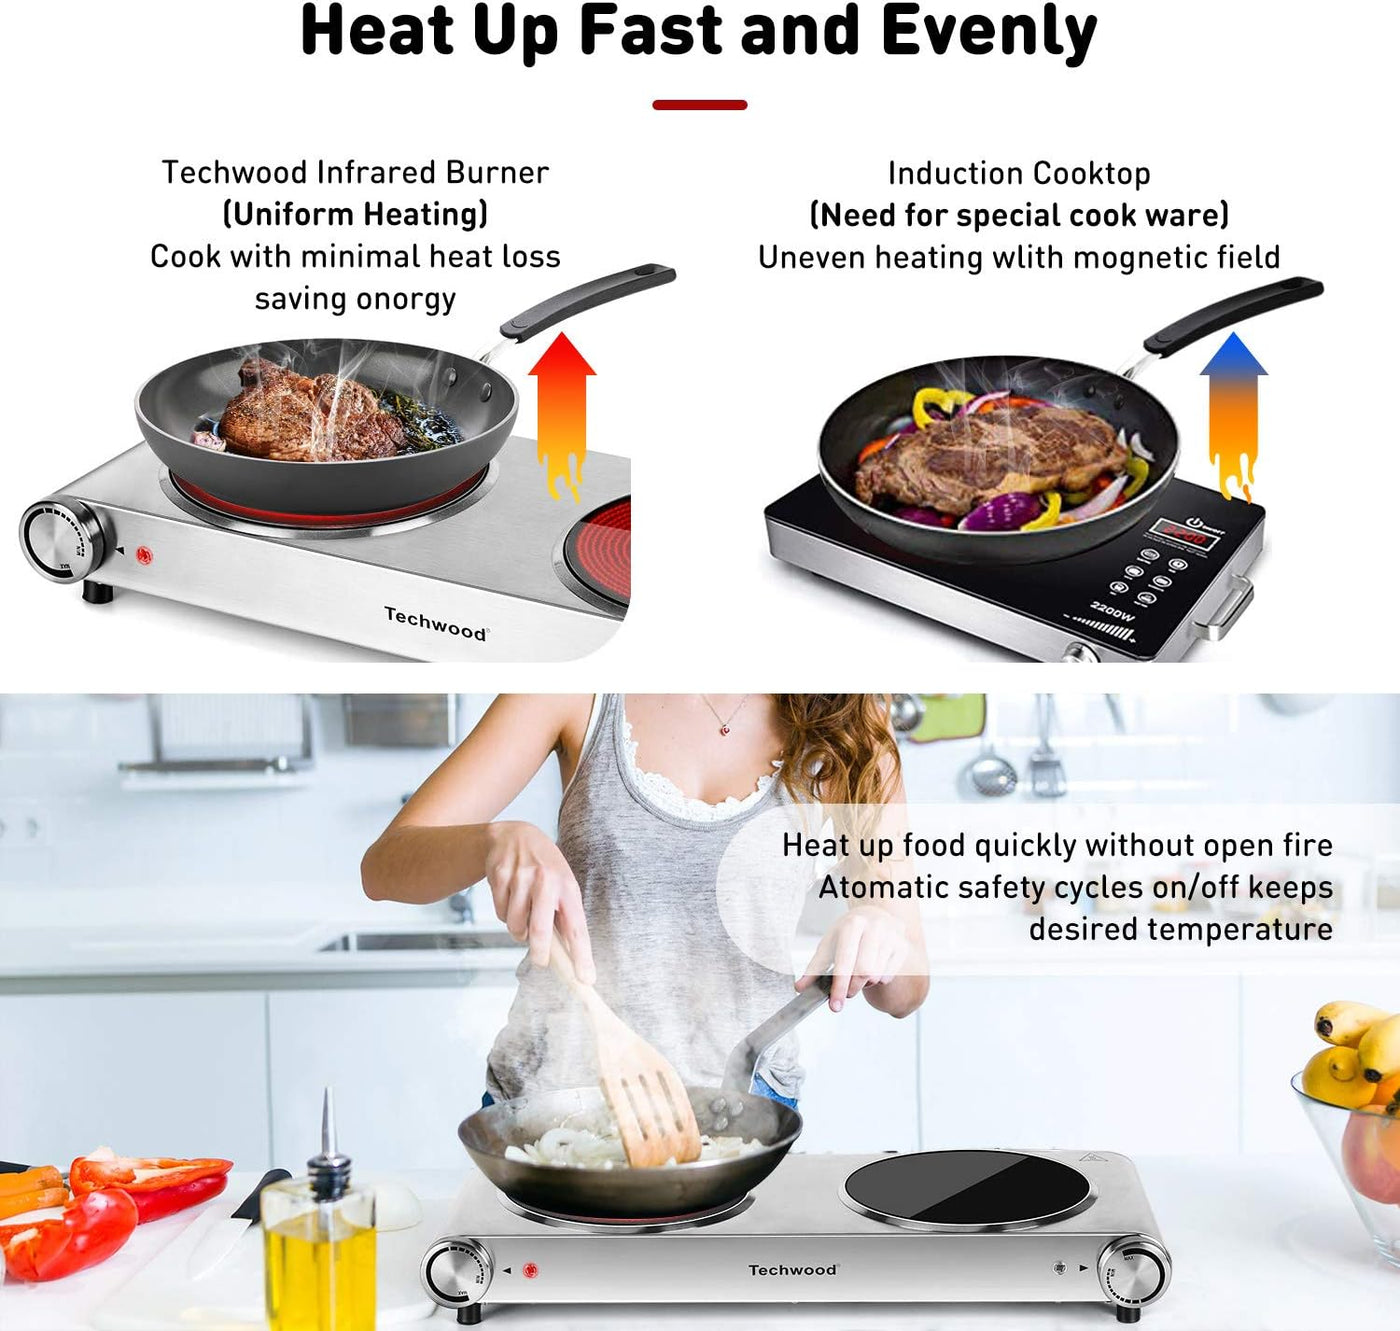  Hot Plate, Techwood 1800W Portable Electric Stove for